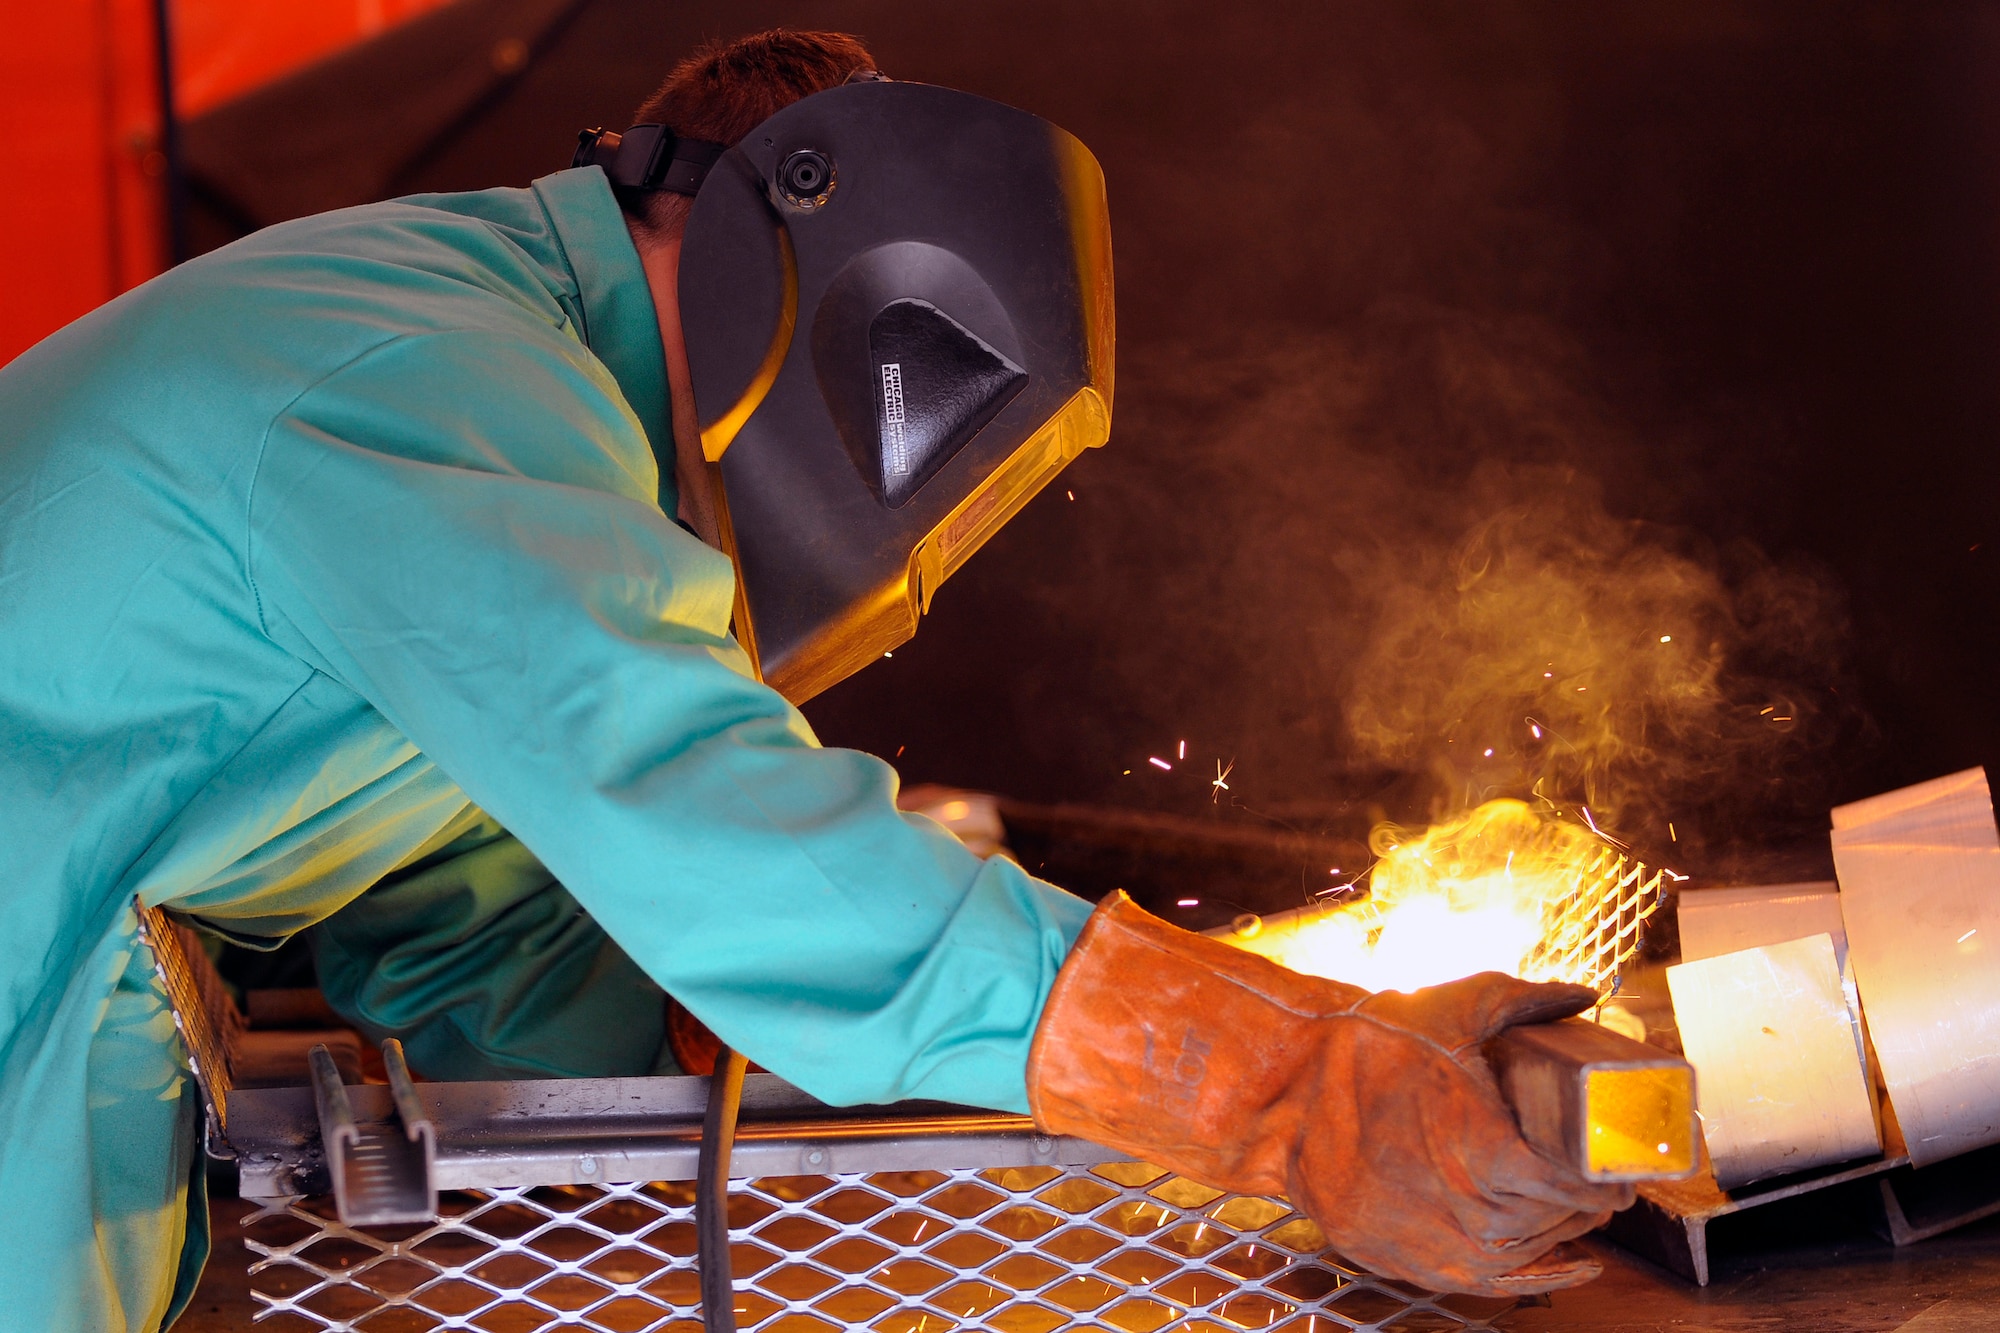 A Field Engineering and Readiness Laboratory cadet practices welding on a FERL flight project at the U.S. Air Force Academy June 5. The FERL program is mandatory for cadets majoring in civil engineering. (U.S. Air Force photo/Dave Ahlschwede)